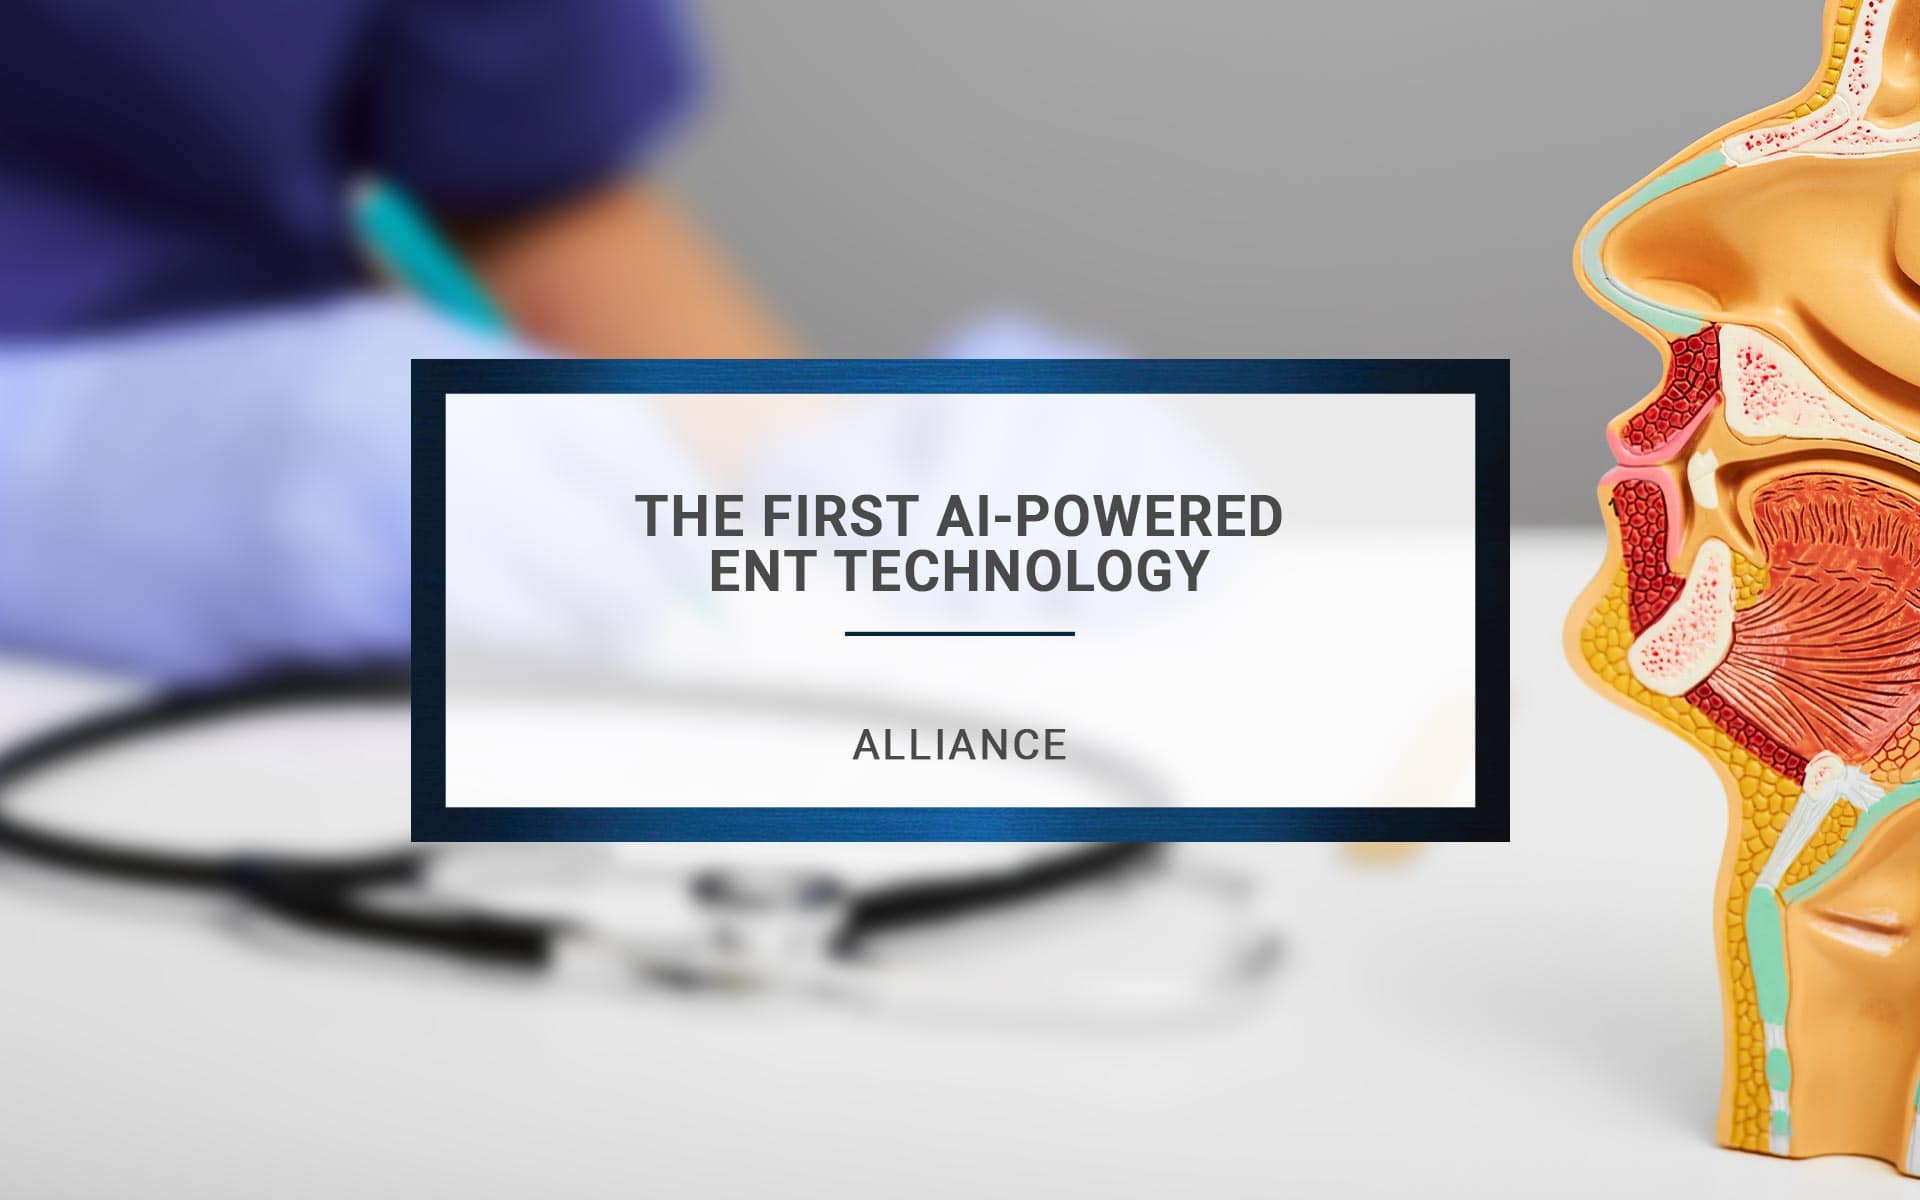 The First AI-Powered ENT Technology